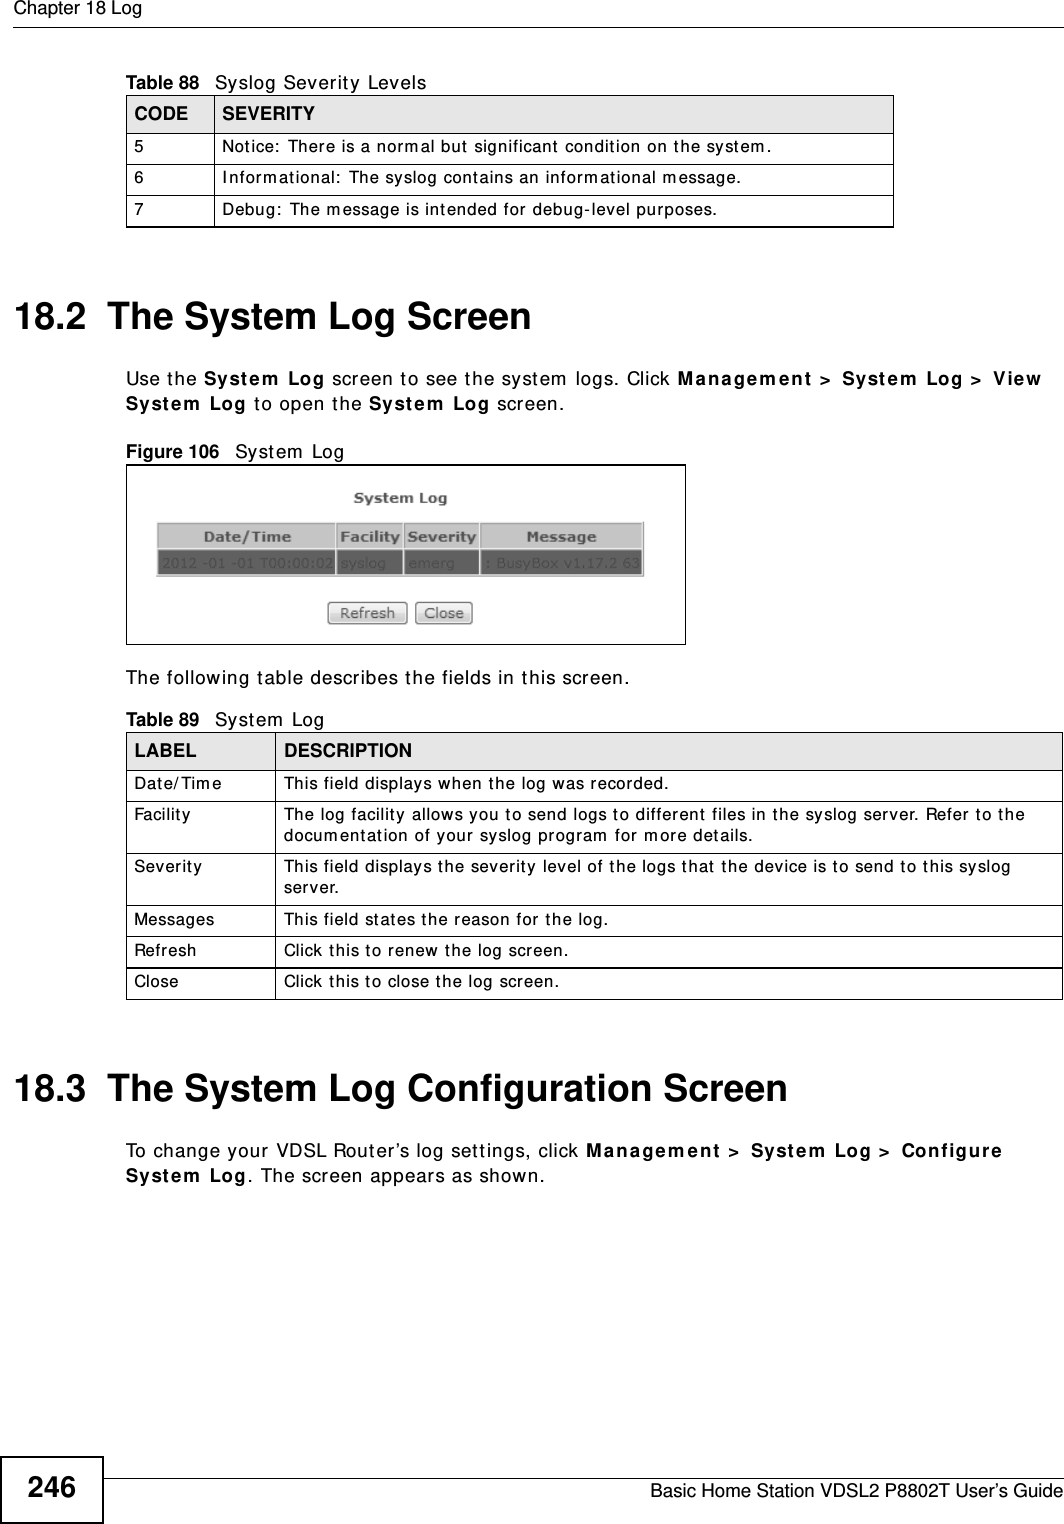 Chapter 18 LogBasic Home Station VDSL2 P8802T User’s Guide24618.2  The System Log Screen Use t he Syst e m  Log screen t o see t he syst em  logs. Click M anagem ent  &gt;  Syst e m  Log &gt;  View  Syst e m  Log t o open t he Syst e m  Log screen. Figure 106   Sy st em  LogThe following t able describes t he fields in t his screen.   18.3  The System Log Configuration ScreenTo change your VDSL Router’s log set t ings, click M a na ge m ent &gt;  Syst e m  Log &gt;  Configur e Syst e m  Log. The screen appears as shown.5 Not ice:  There is a nor m al but significant  condition on the syst em .6 I nform ational:  The syslog cont ains an inform at ional m essage.7 Debug:  The m essage is intended for debug- level purposes.Table 88   Syslog Severit y LevelsCODE SEVERITYTable 89   System  LogLABEL DESCRIPTIONDat e/ Tim e  This field displays when the log was recorded. Facility  The log facility allows you t o send logs t o different  files in the syslog server. Refer to the docum entation of your syslog program  for m ore det ails.Sever ity This field displays t he severit y level of the logs t hat  the device is to send t o this syslog server.Messages This field st at es the reason for the log.Refresh Click this t o renew  t he log scr een. Close Click this to close the log screen. 